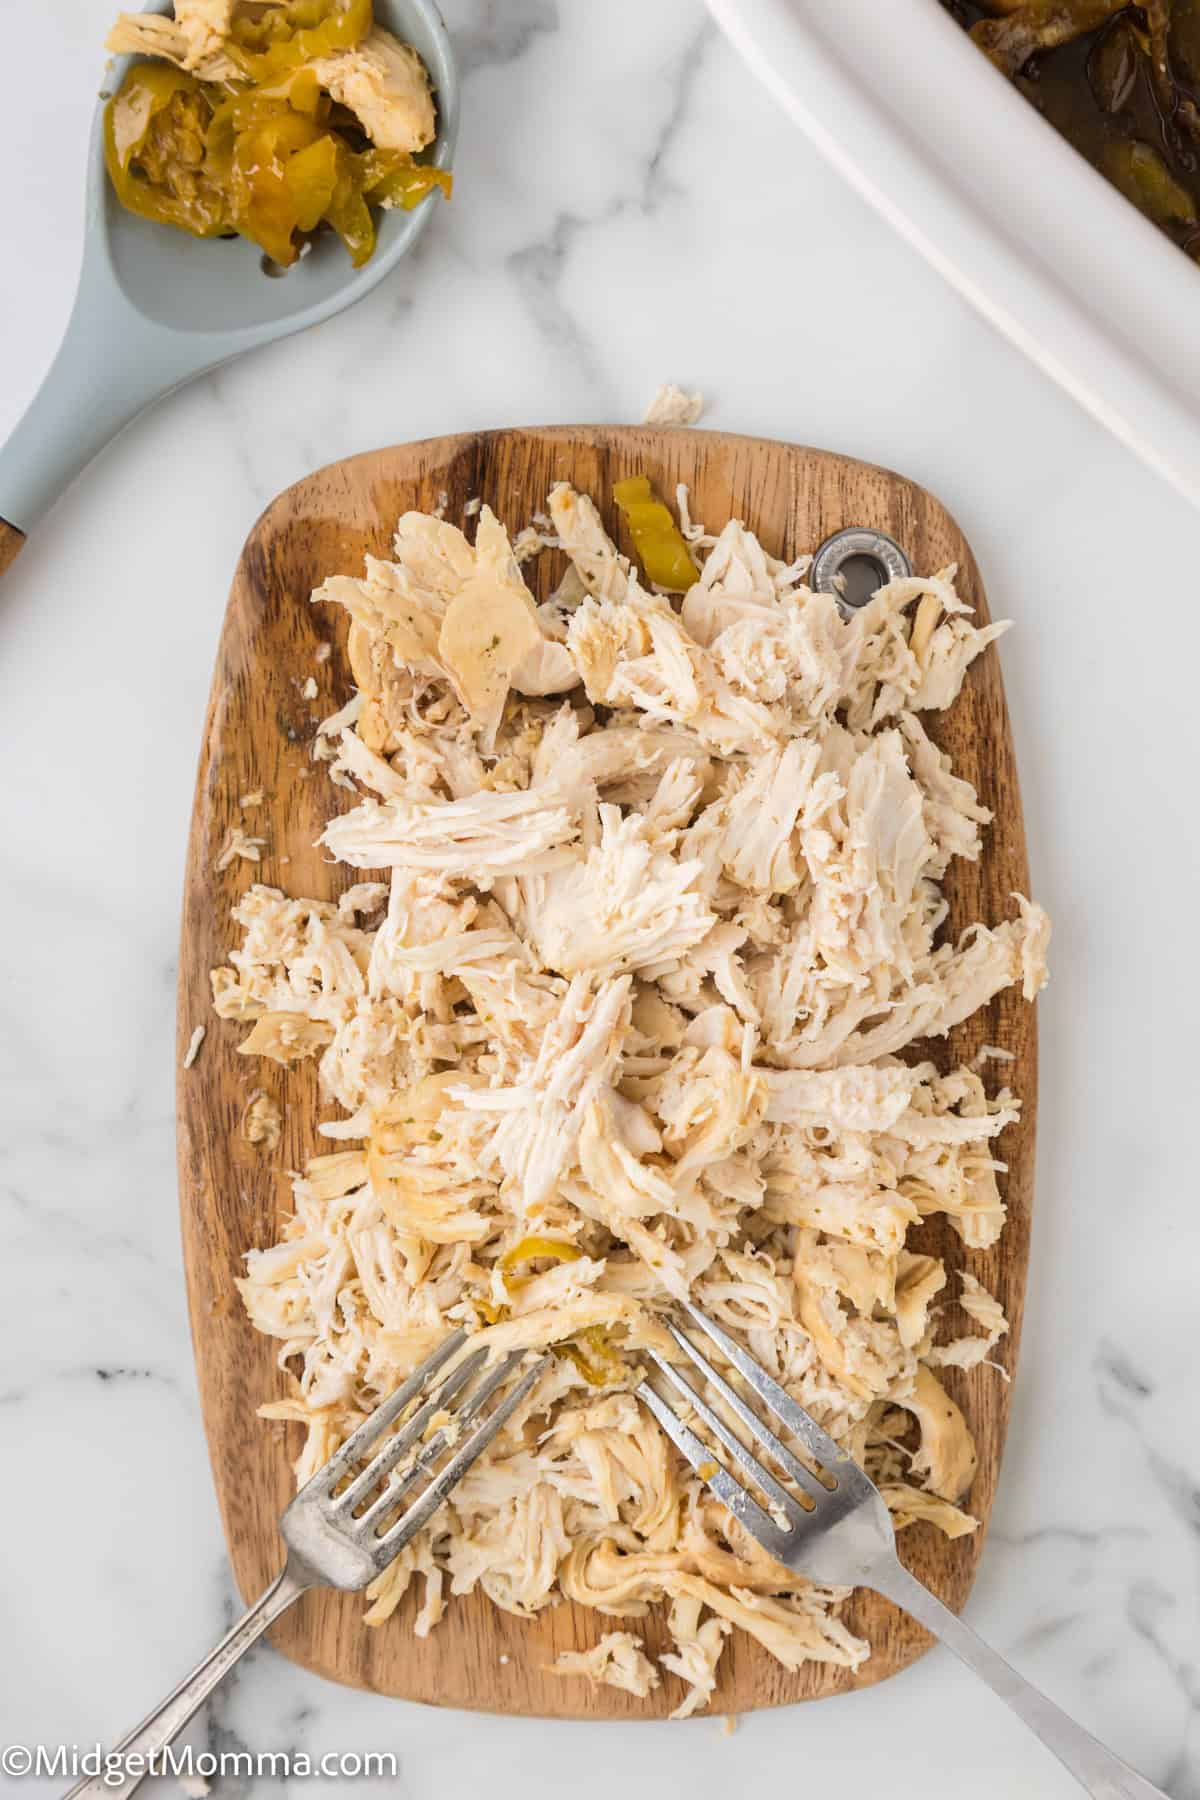 Shredded chicken on a wooden cutting board with forks, accompanied by a side bowl of pickles.